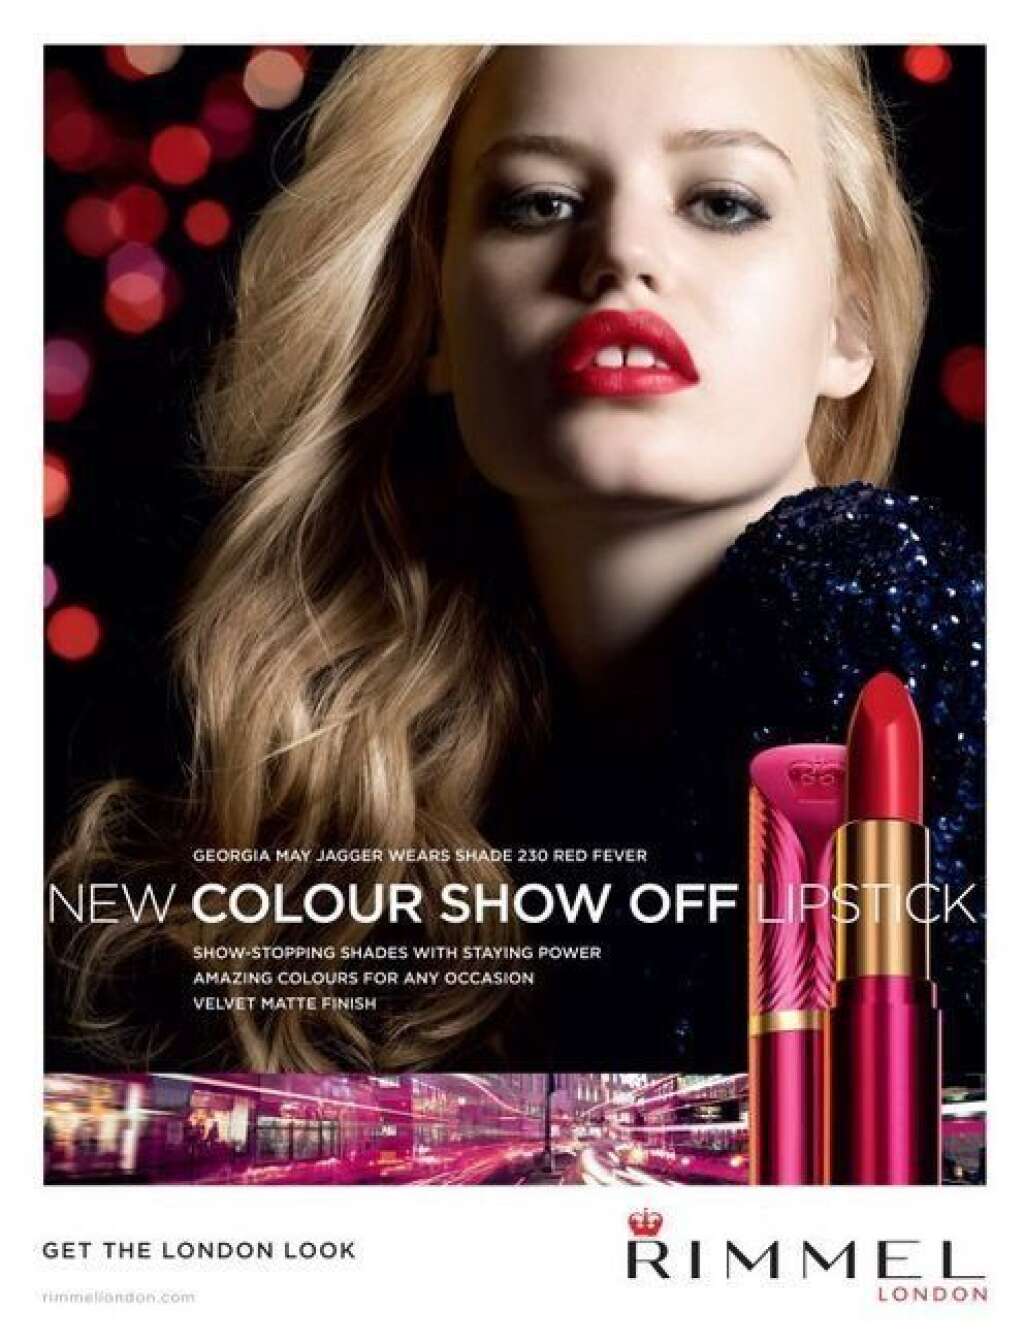 Georgia May Jagger, daughter of Jerry Hall & Mick Jagger, modeling for Rimmel - (Rimmel)